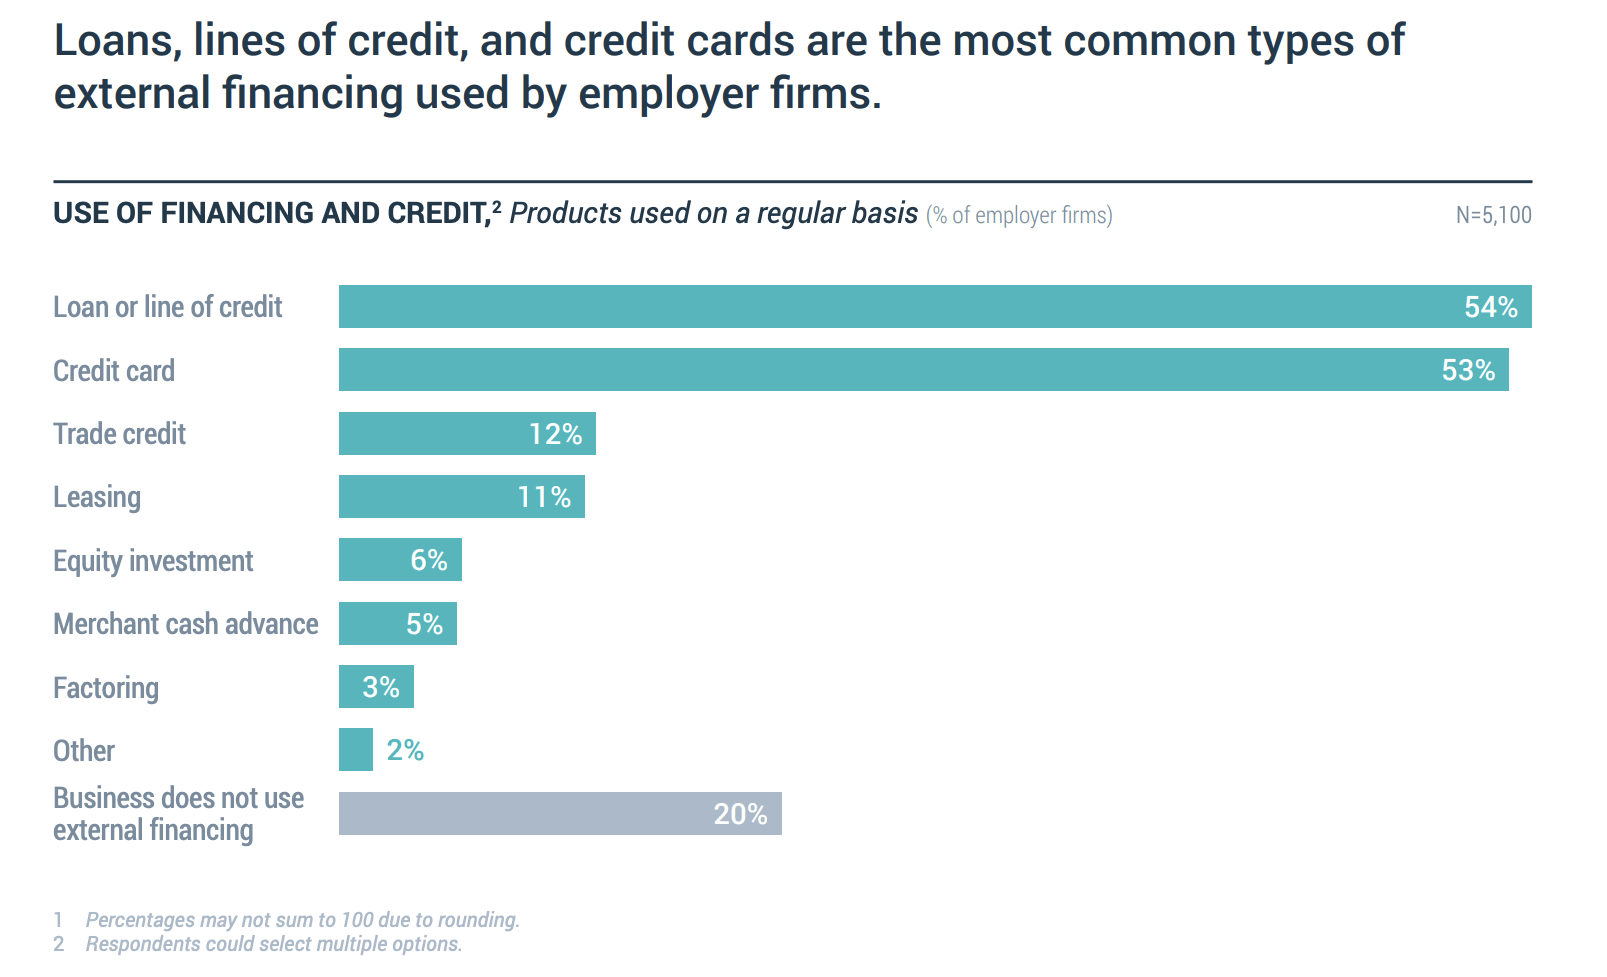 use of financing and credit by type